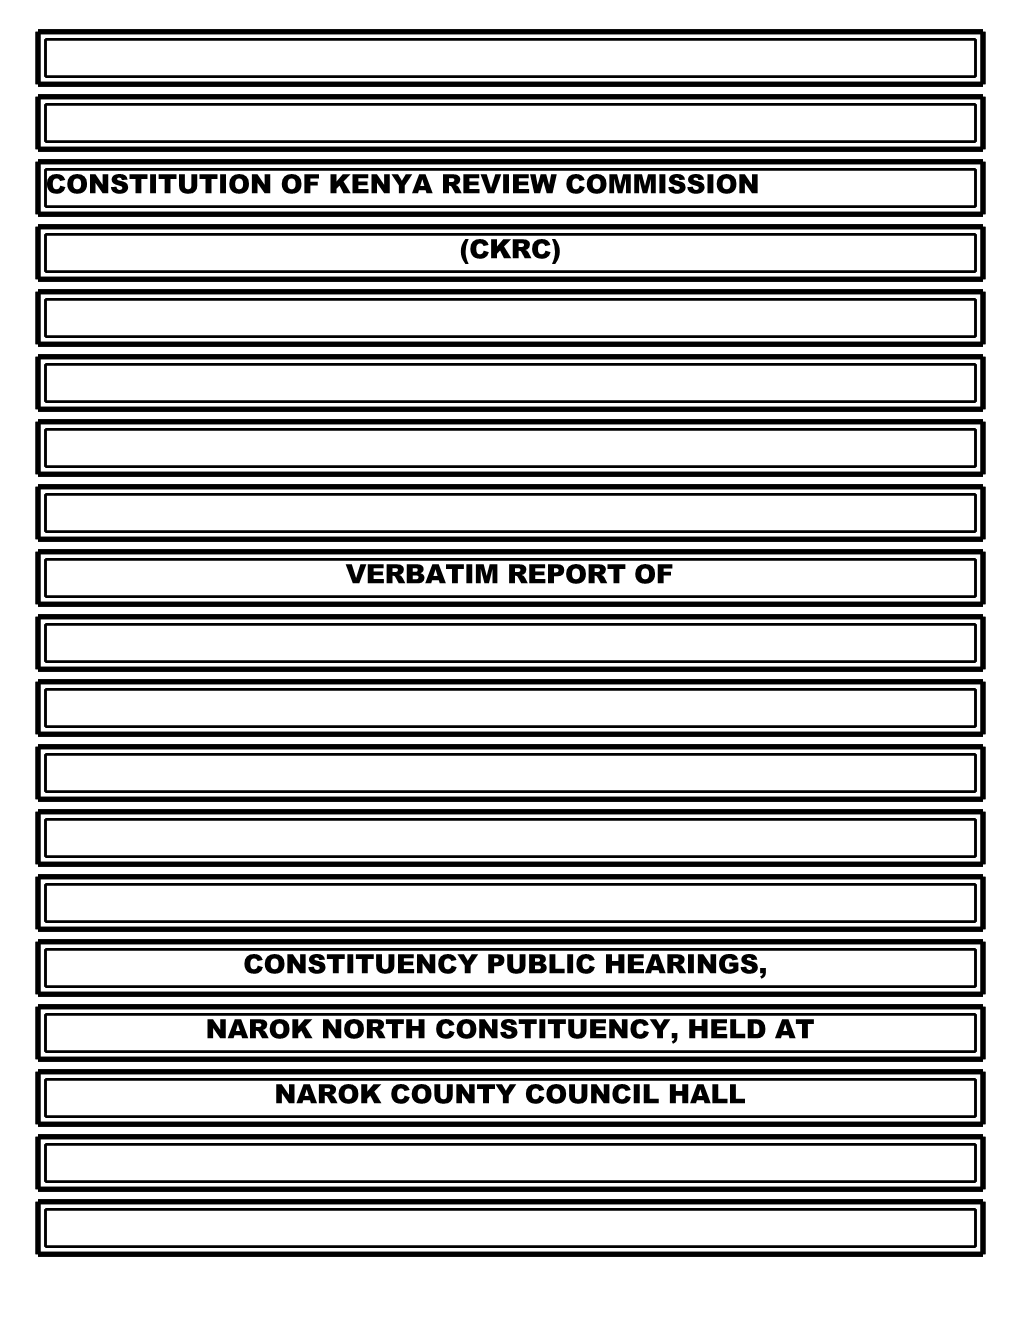 Constitution of Kenya Review Commission (Ckrc)